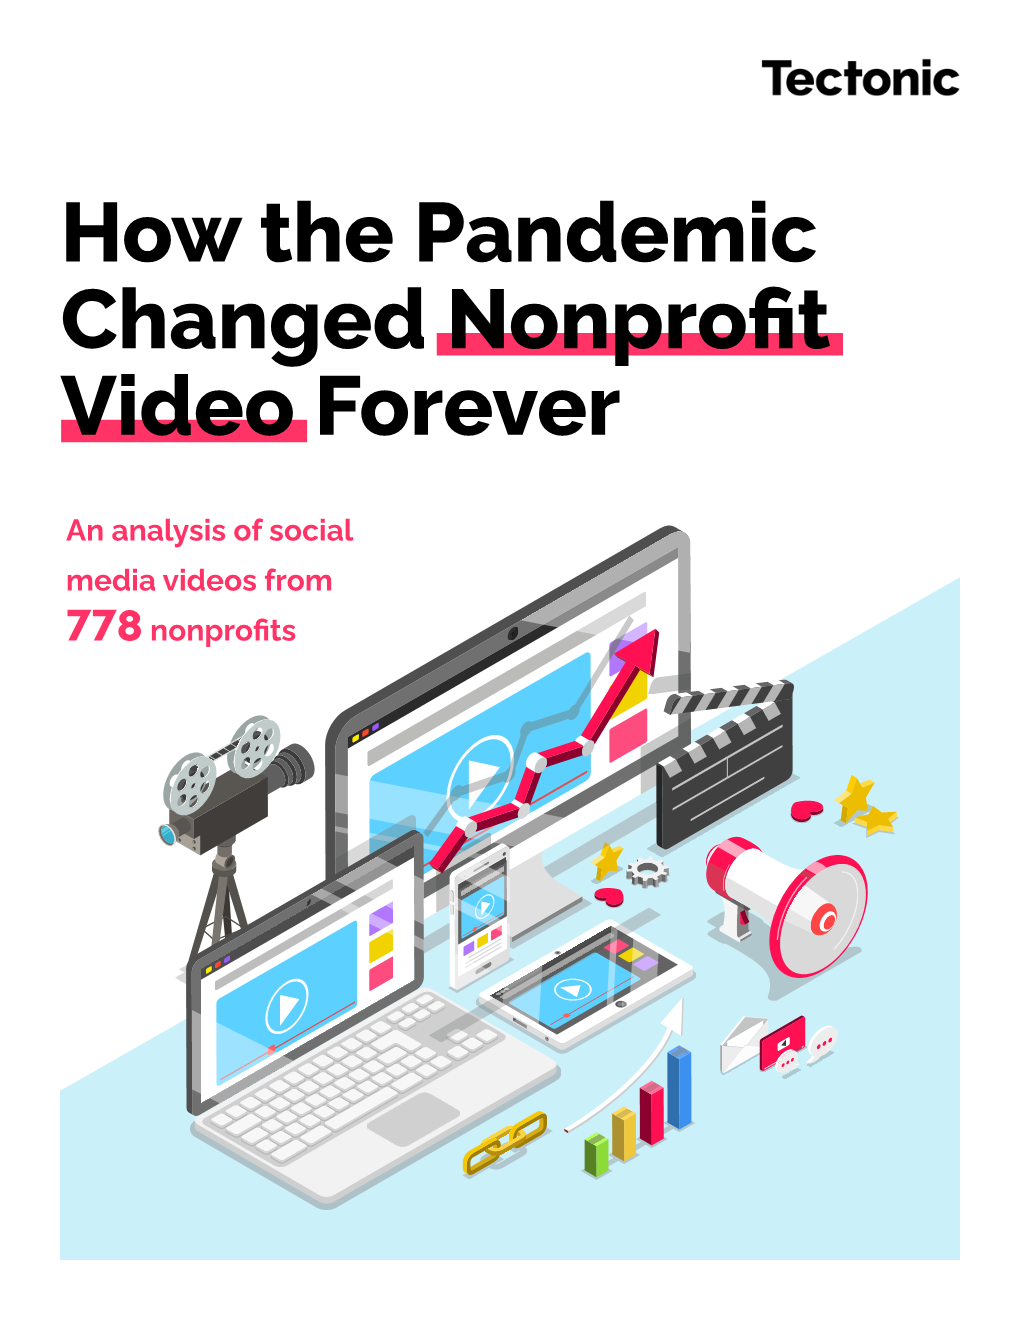 How the Pandemic Changed Nonprofit Video Forever